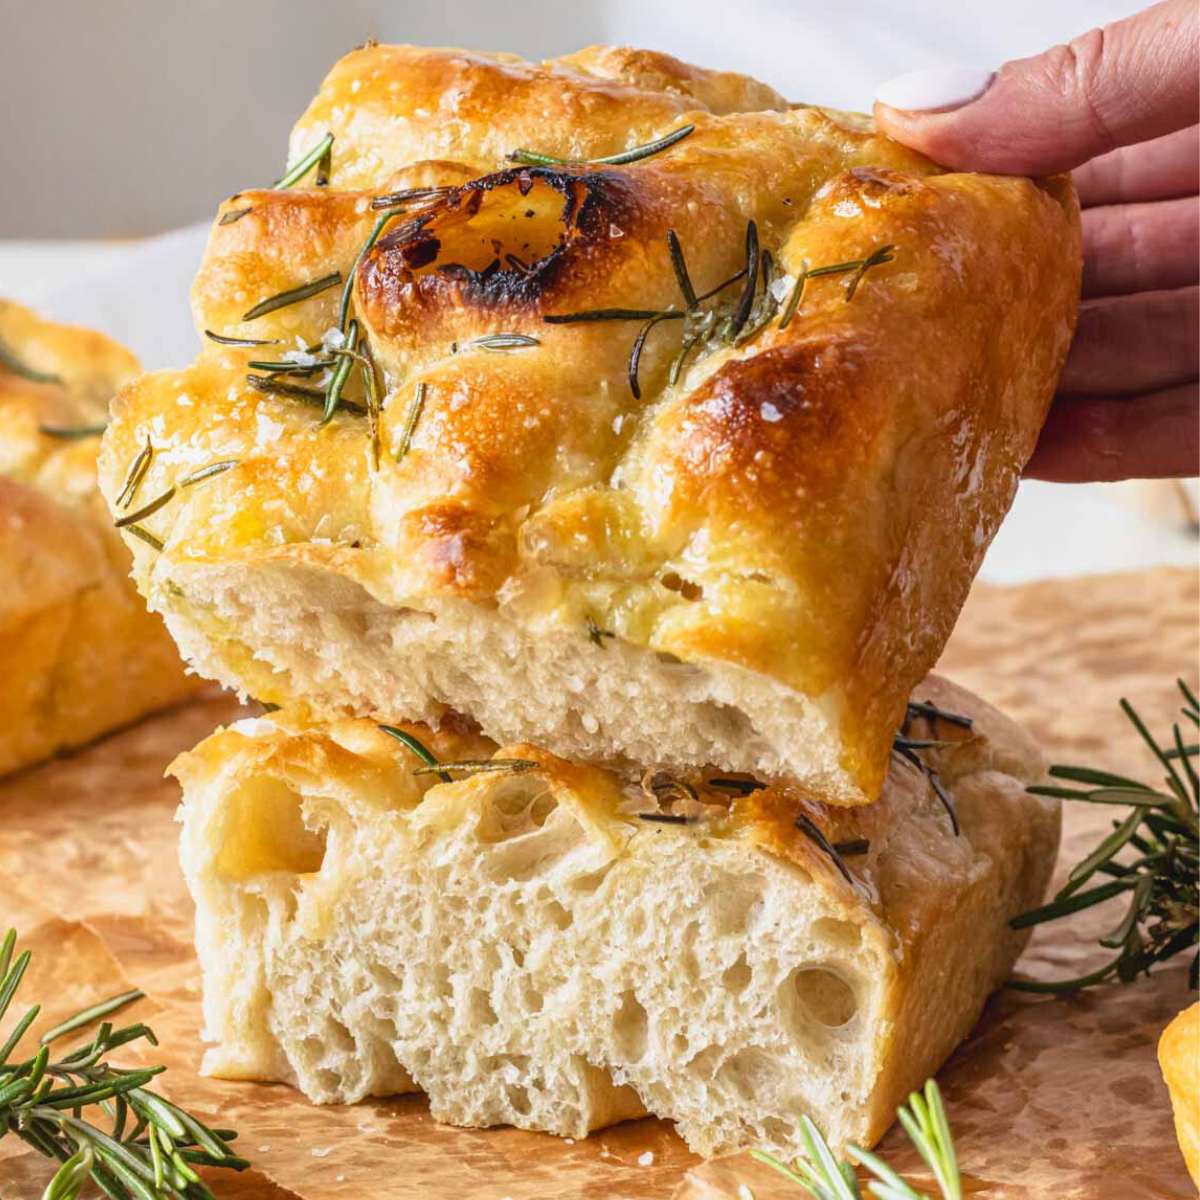 Focaccia with rosemary and a hand